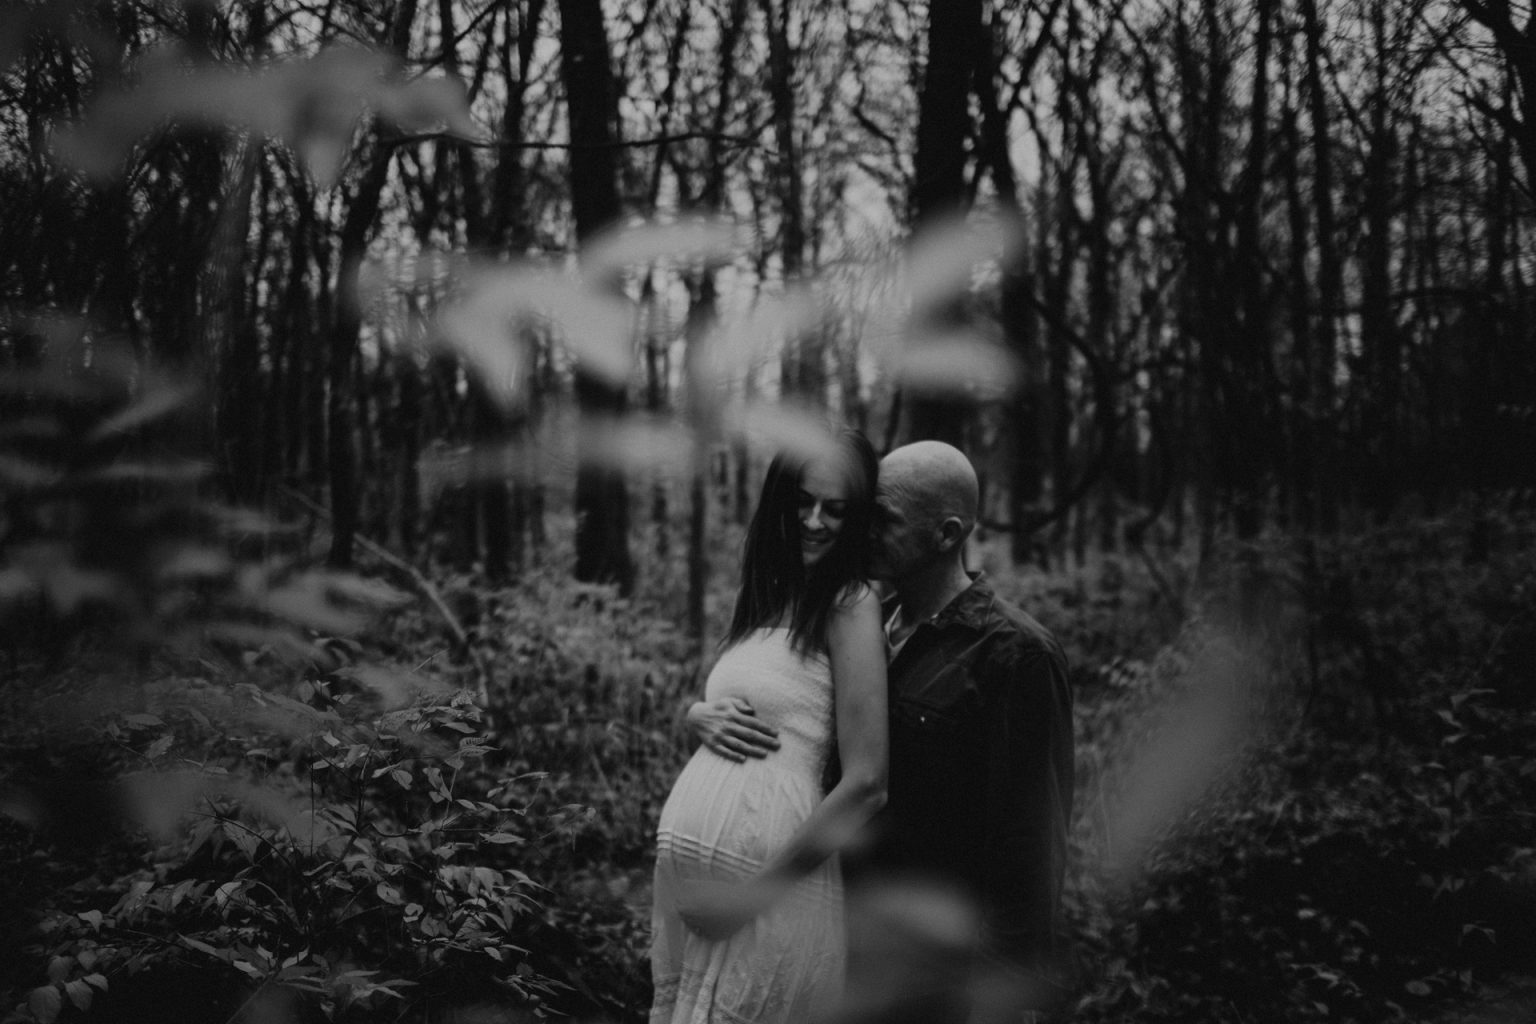 man pregnant woman woods forest illinois